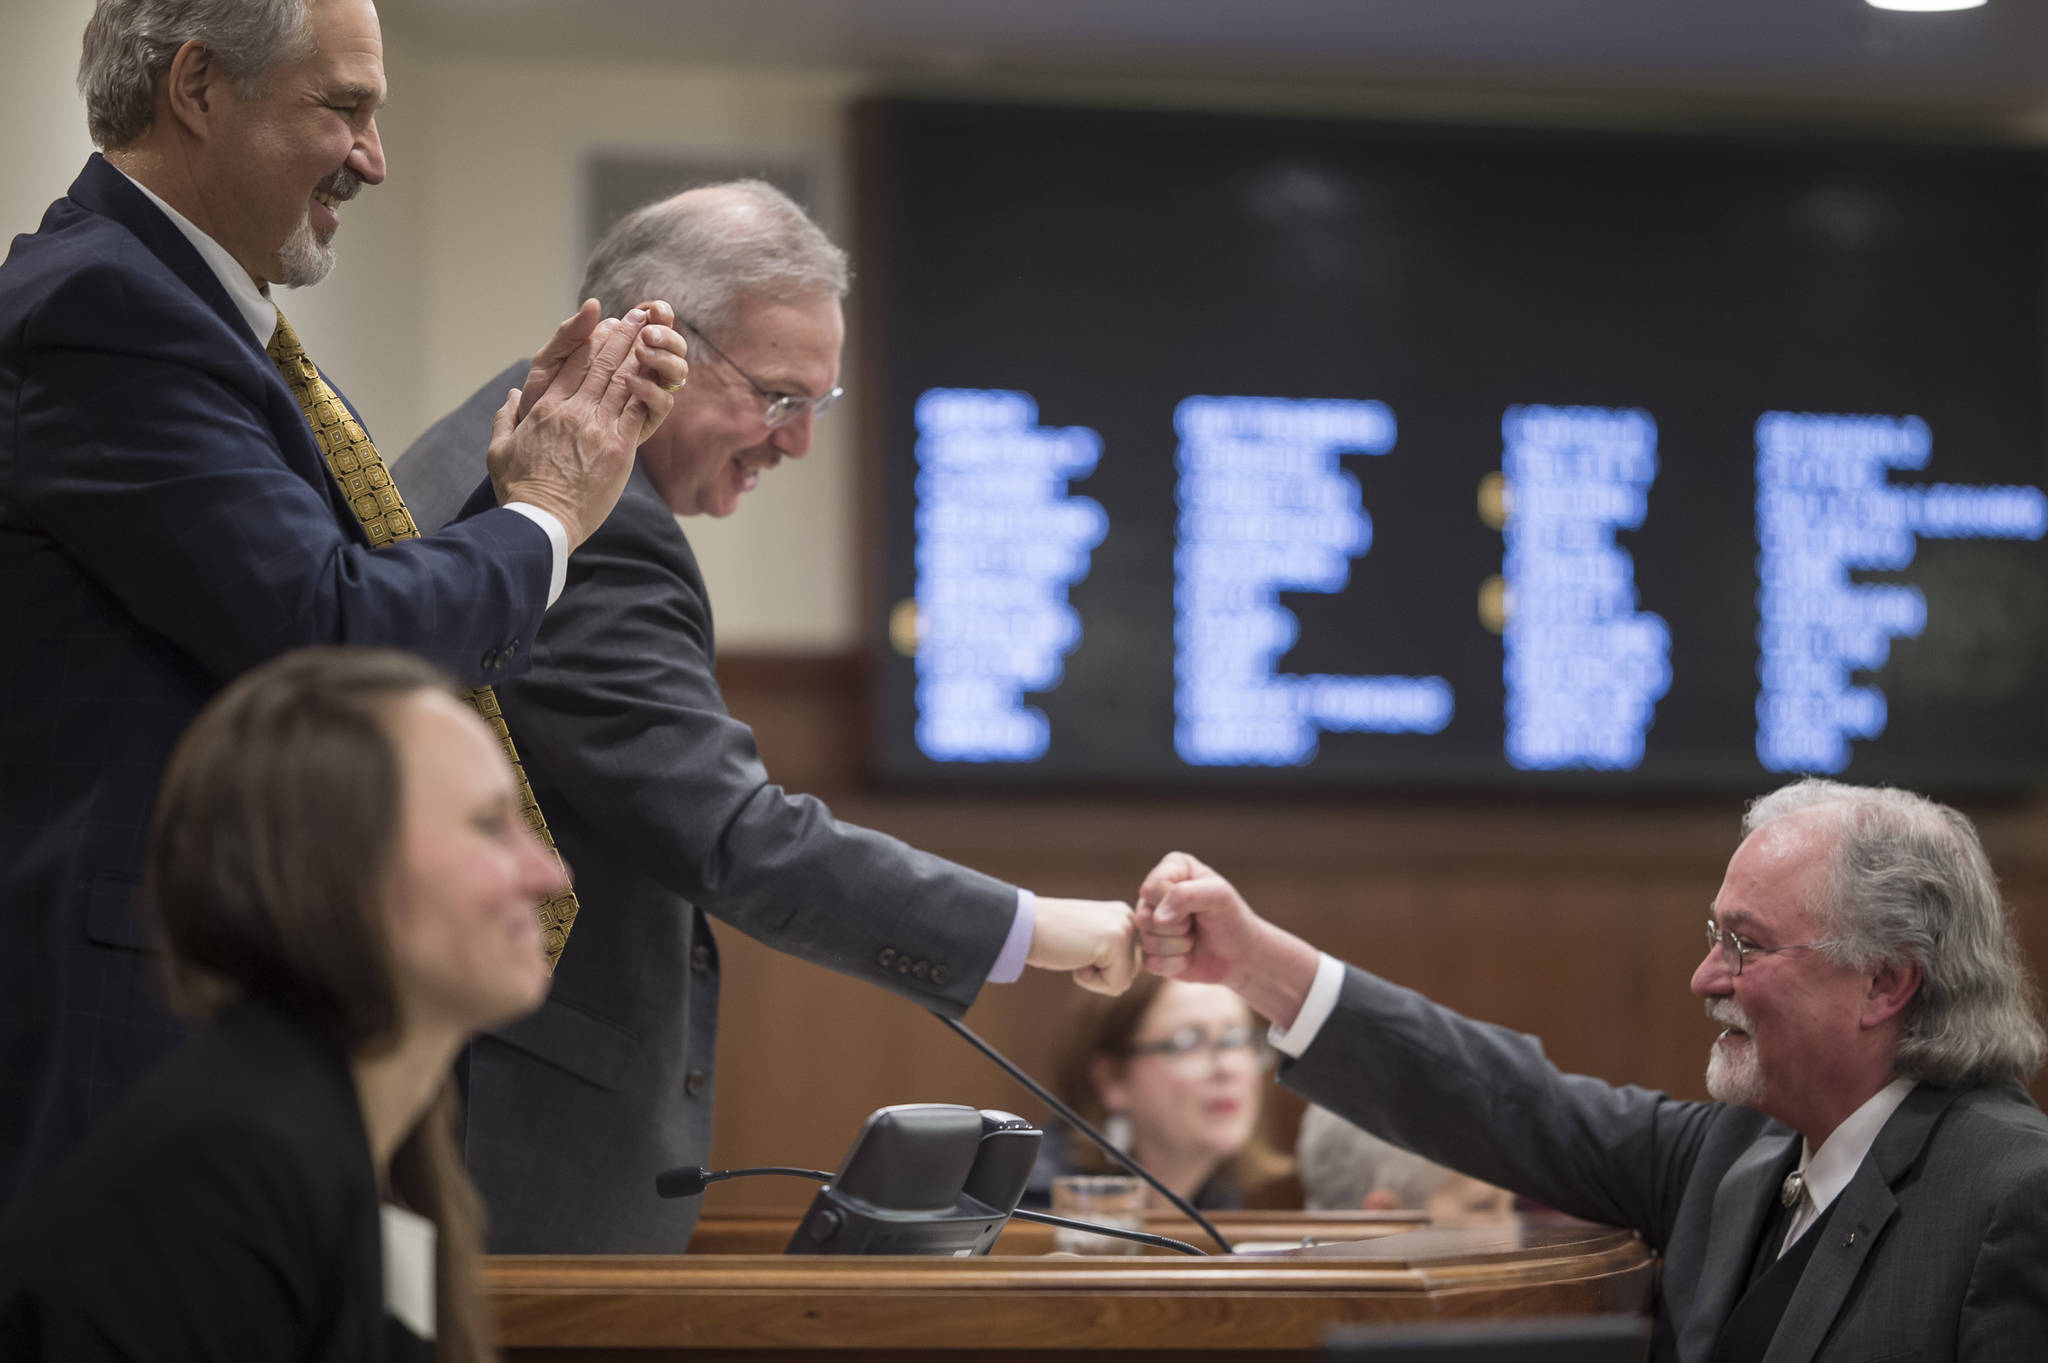 Alaska Supreme Court Chief Justice Craig Stowers fist bumps with Senate President Pete Kelly, R-Fairbanks, left, and Speaker of the House Bryce Edgmon, D-Dillingham, at the end of his State of the Judiciary address before a joint session of the Alaska Legislature at the Capitol on Wednesday, Feb. 7, 2018. Chief Stowers was suffering from a cold and avoided shaking hands. (Michael Penn | Juneau Empire)